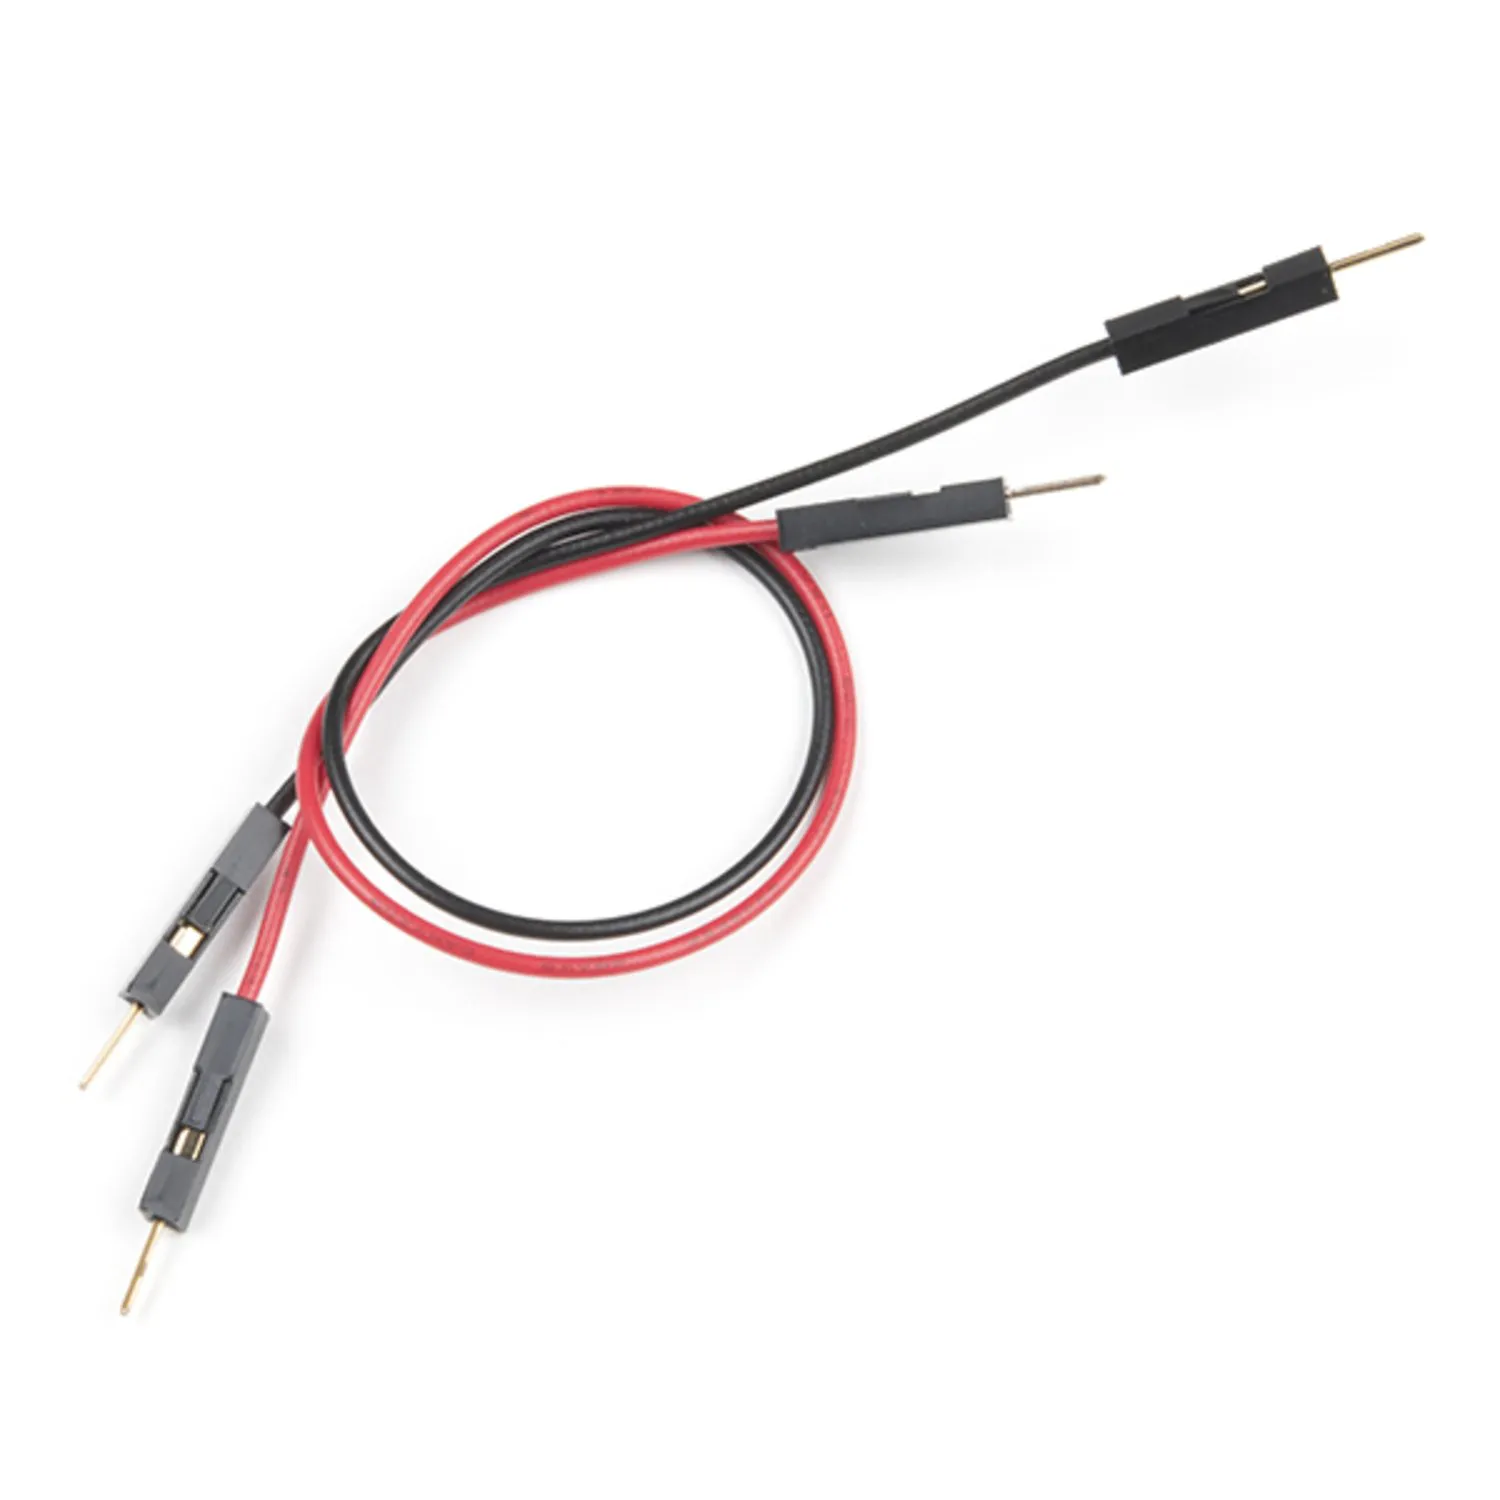 Photo of Jumper Wires Premium 6in. M/M - 2 Pack (Red and Black)